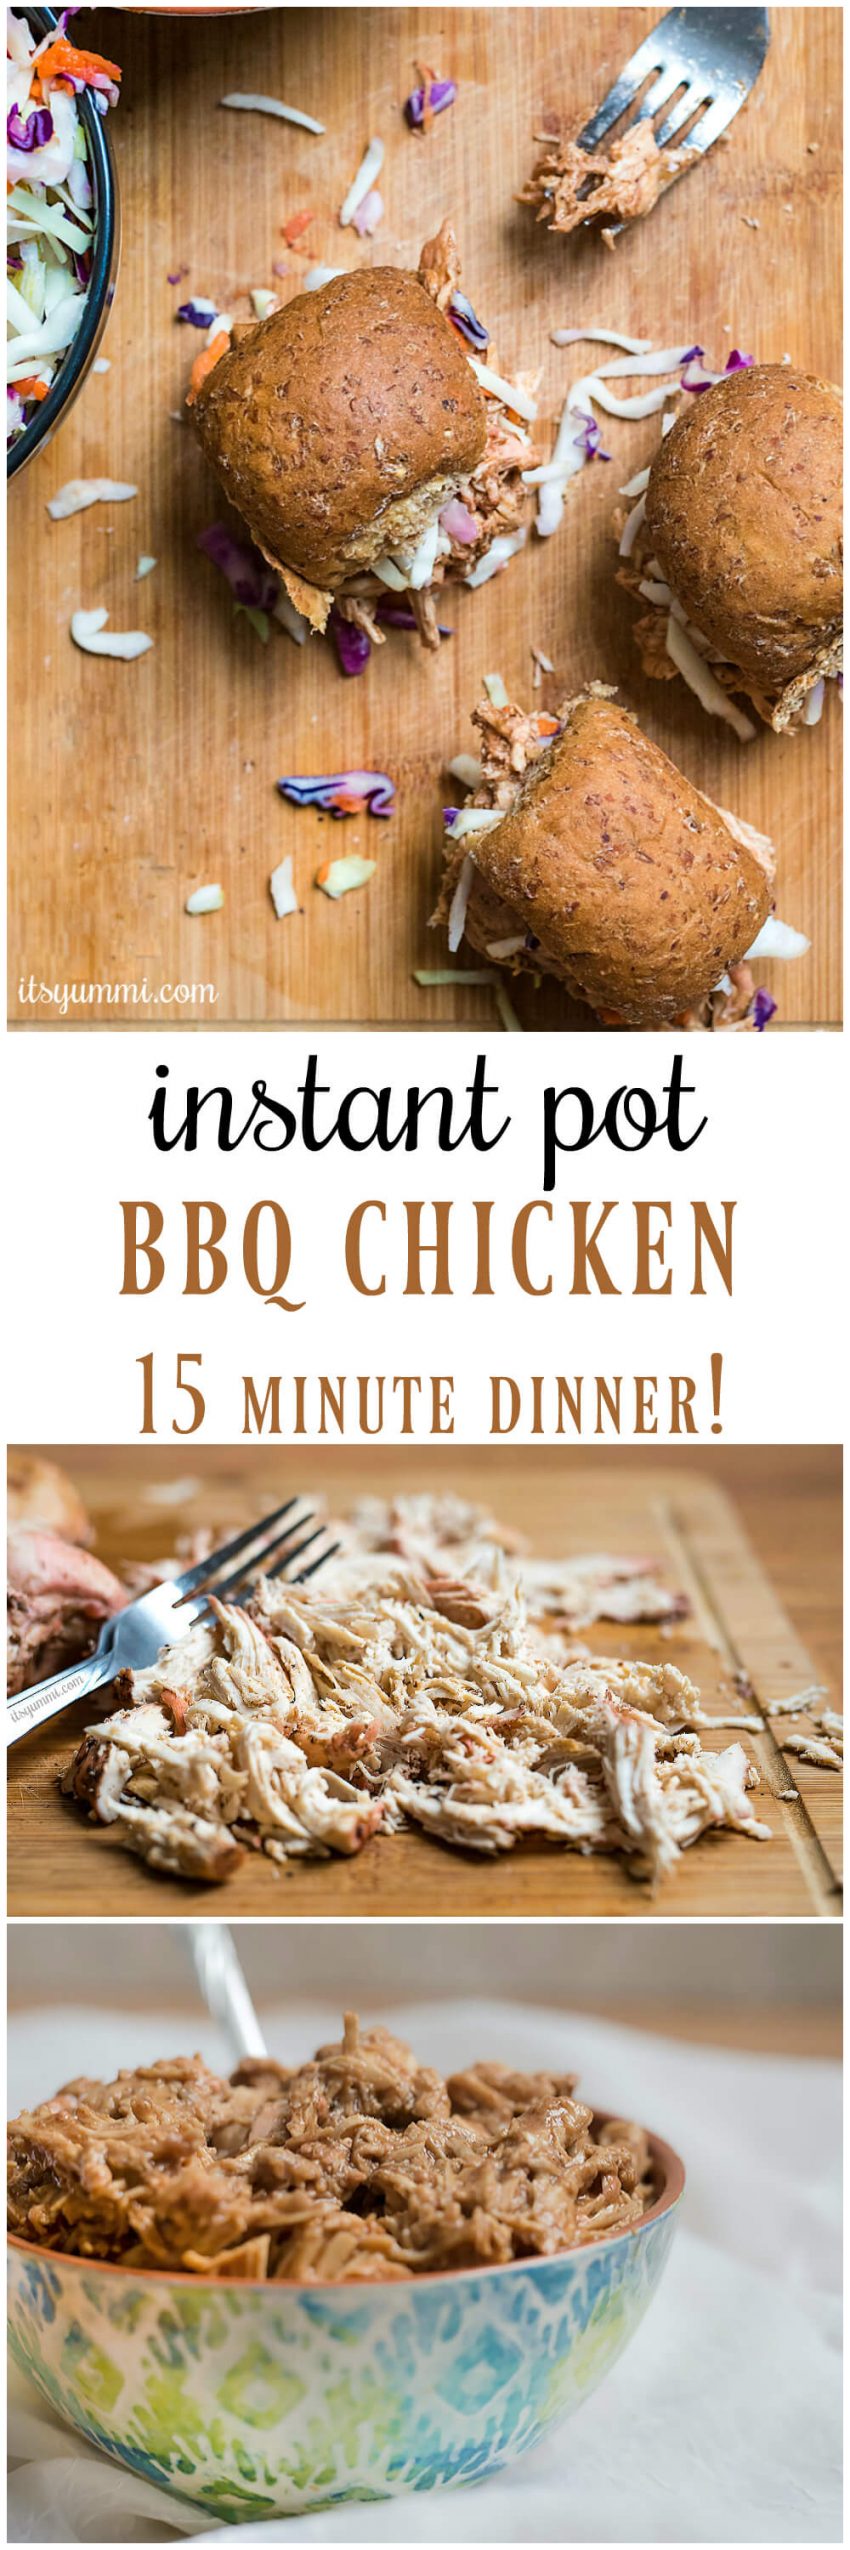 Instant Pot BBQ chicken - an easy pressure cooker chicken recipe, made in 15 minutes! Add it to your favorite soup or casserole recipe. Or, make Instant Pot pulled chicken sliders. #instantpot #recipe #bbq #pressurecooker